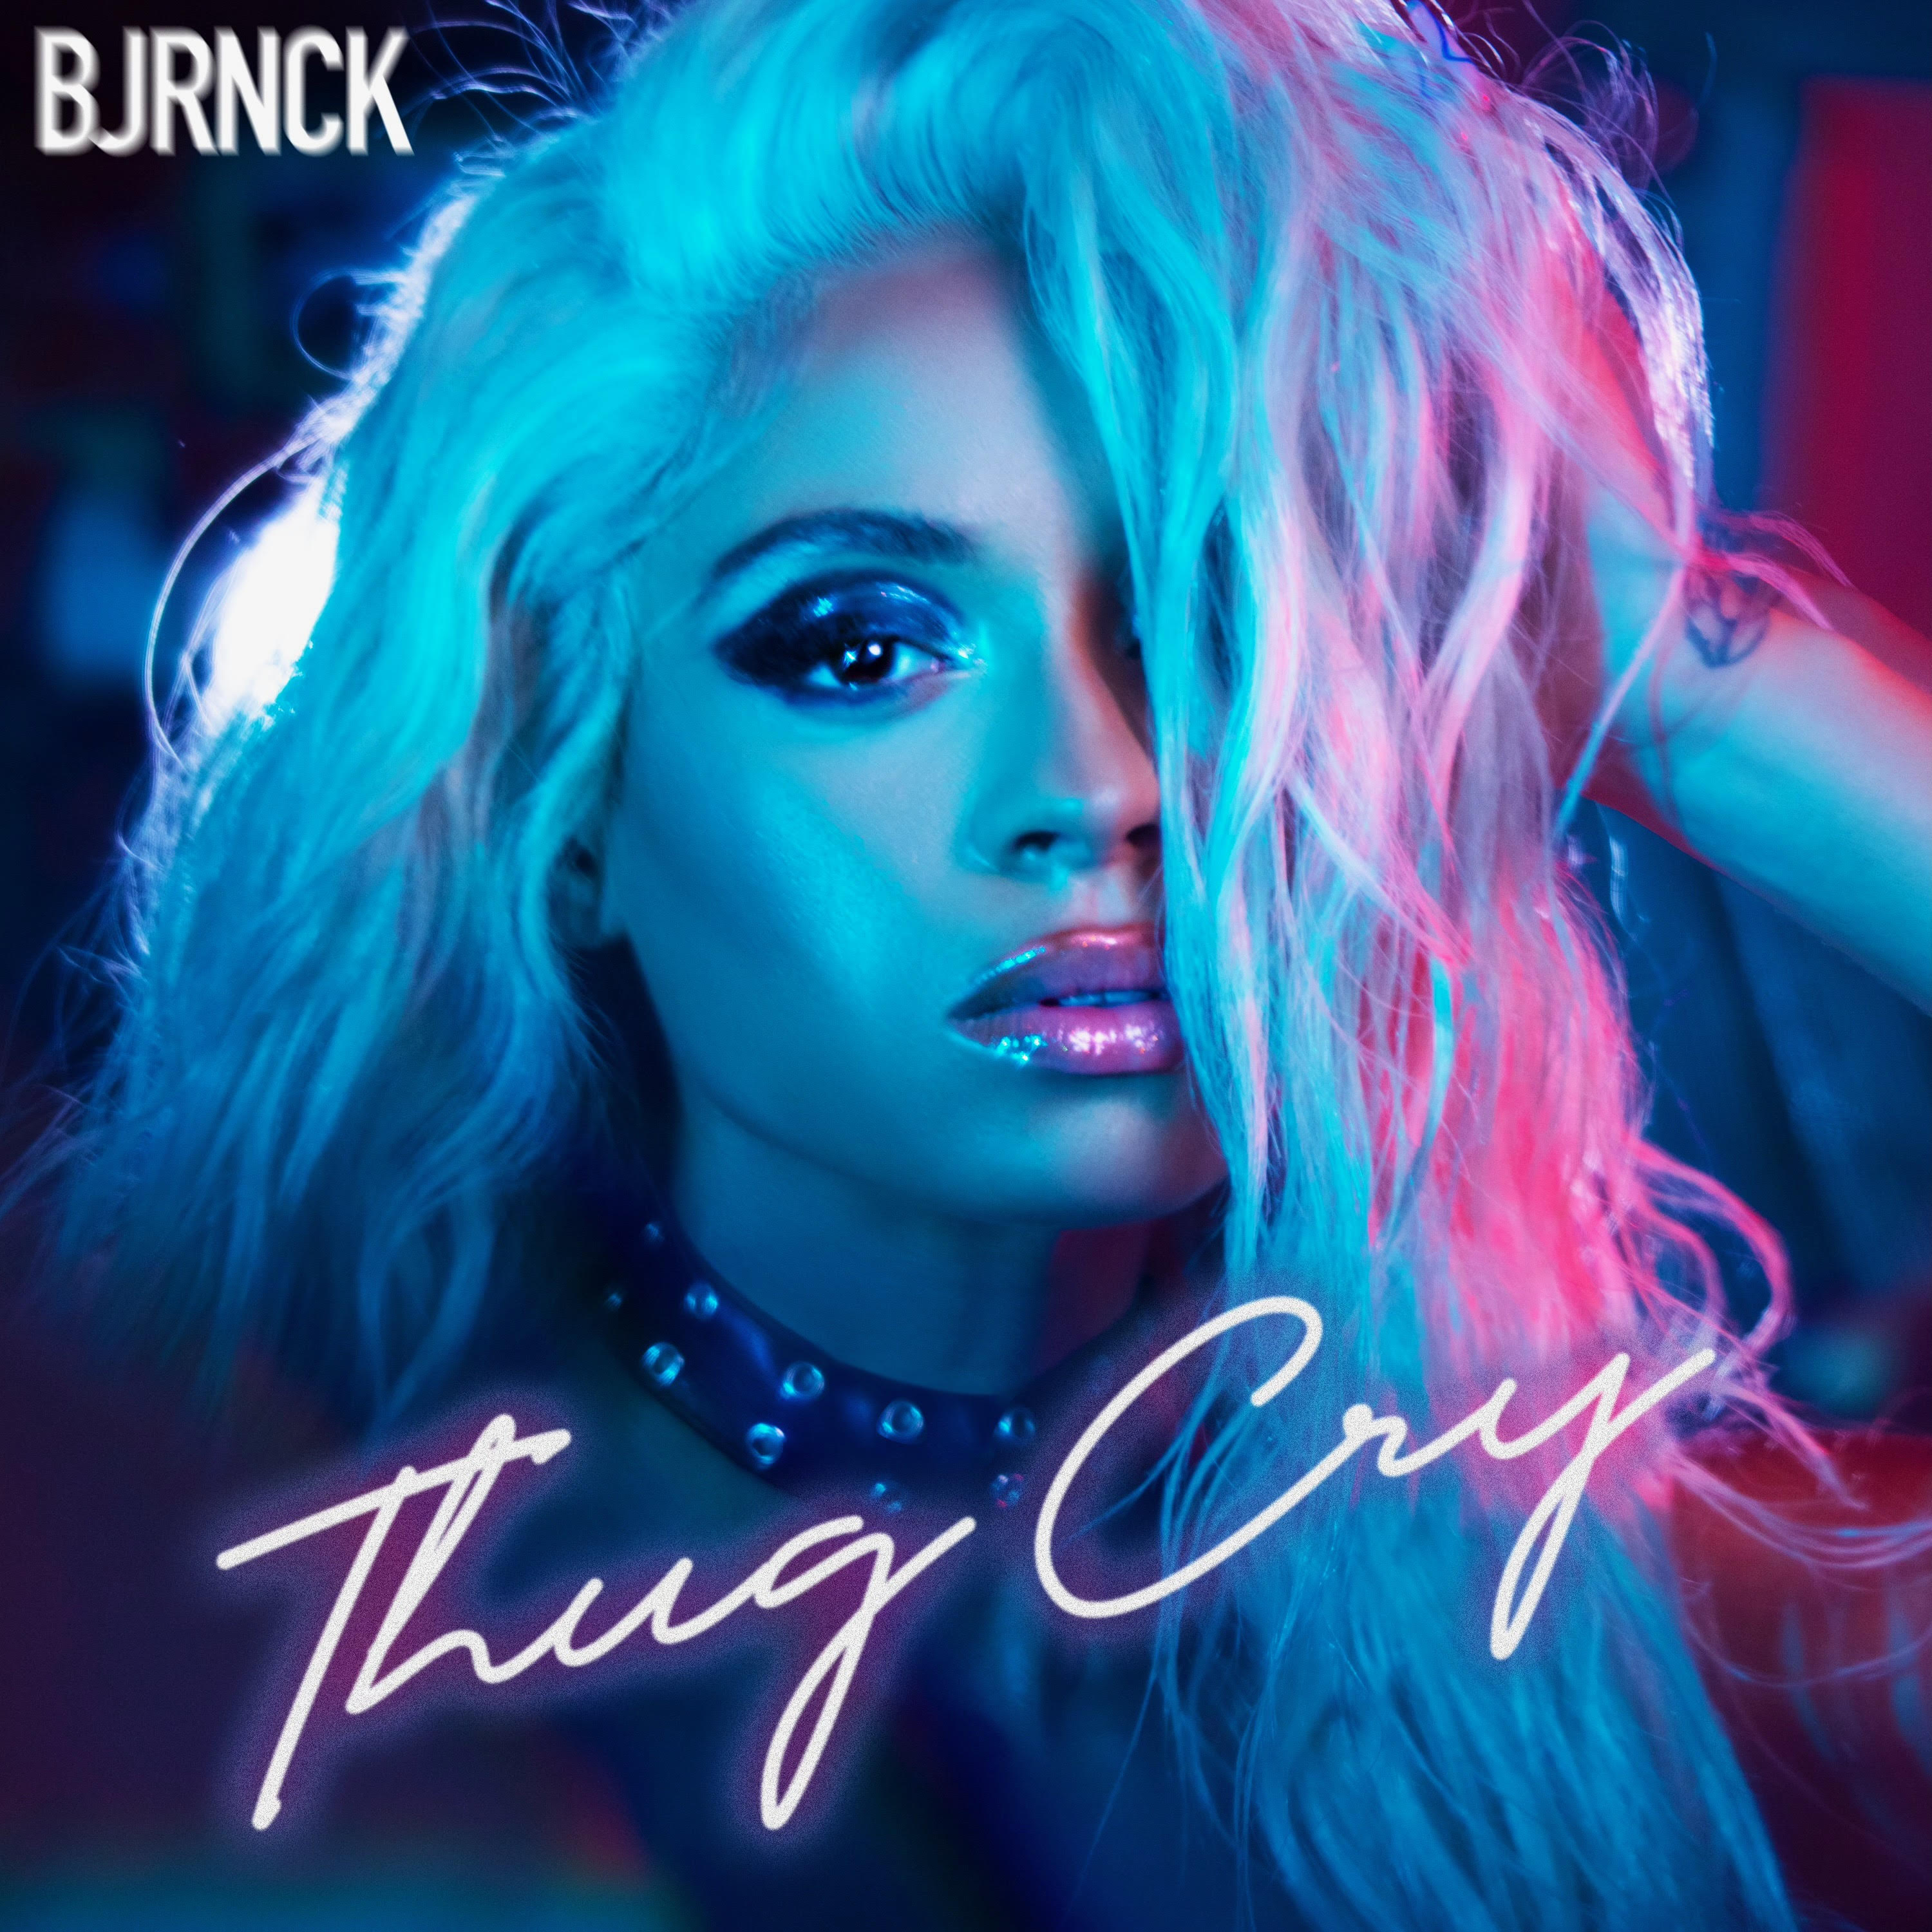 Art for Thug Cry (Clean) by BJRNCK